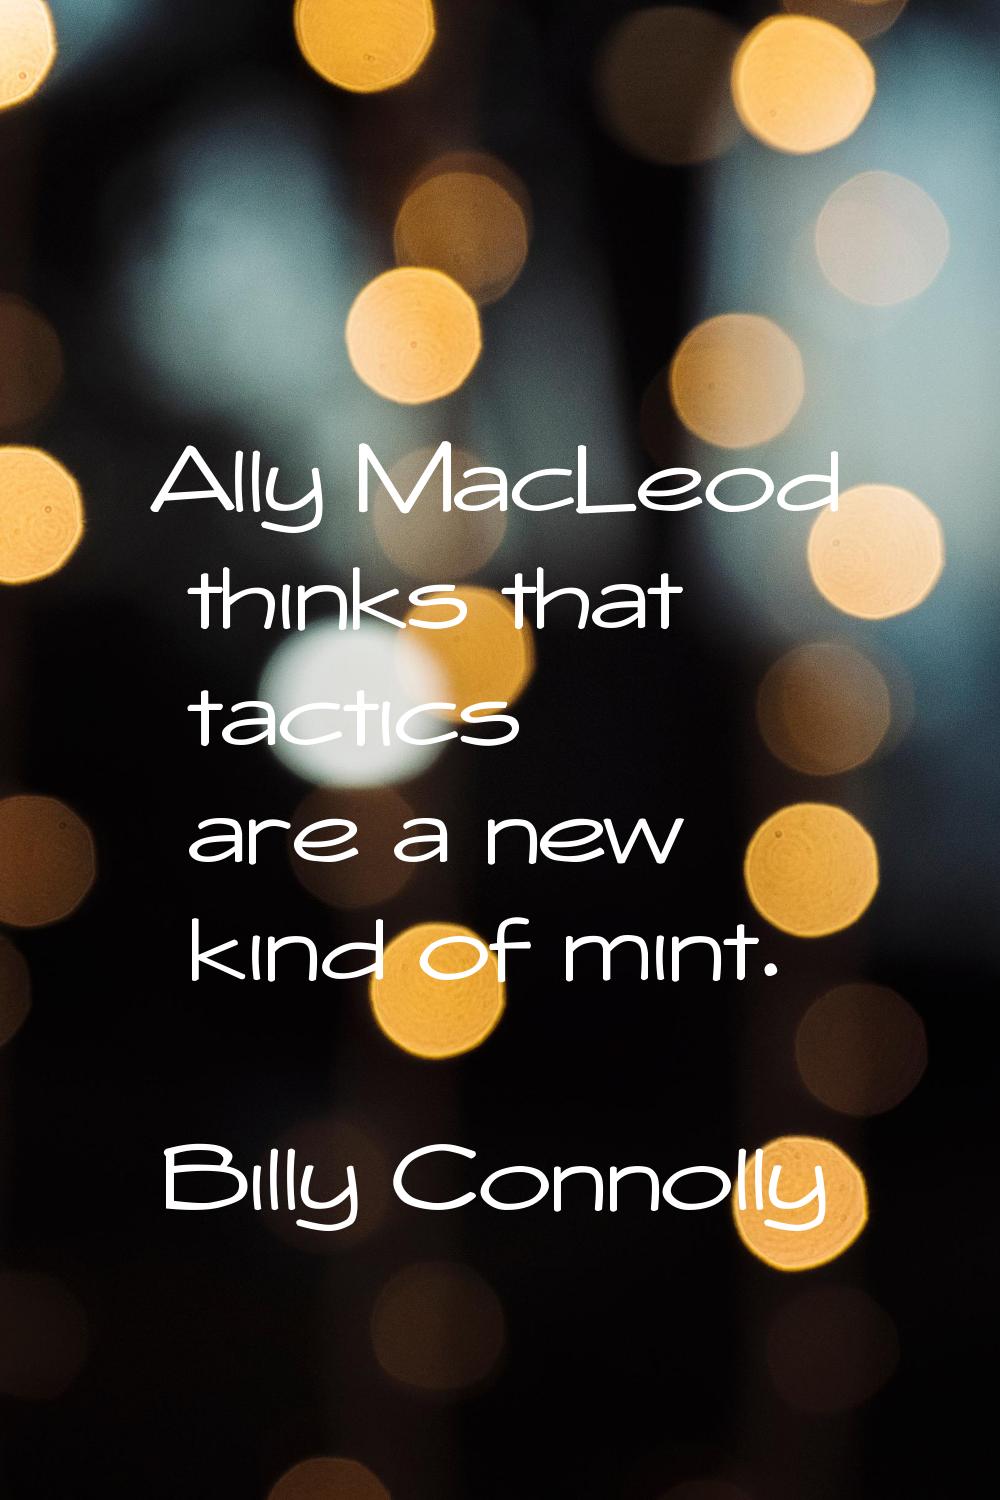 Ally MacLeod thinks that tactics are a new kind of mint.